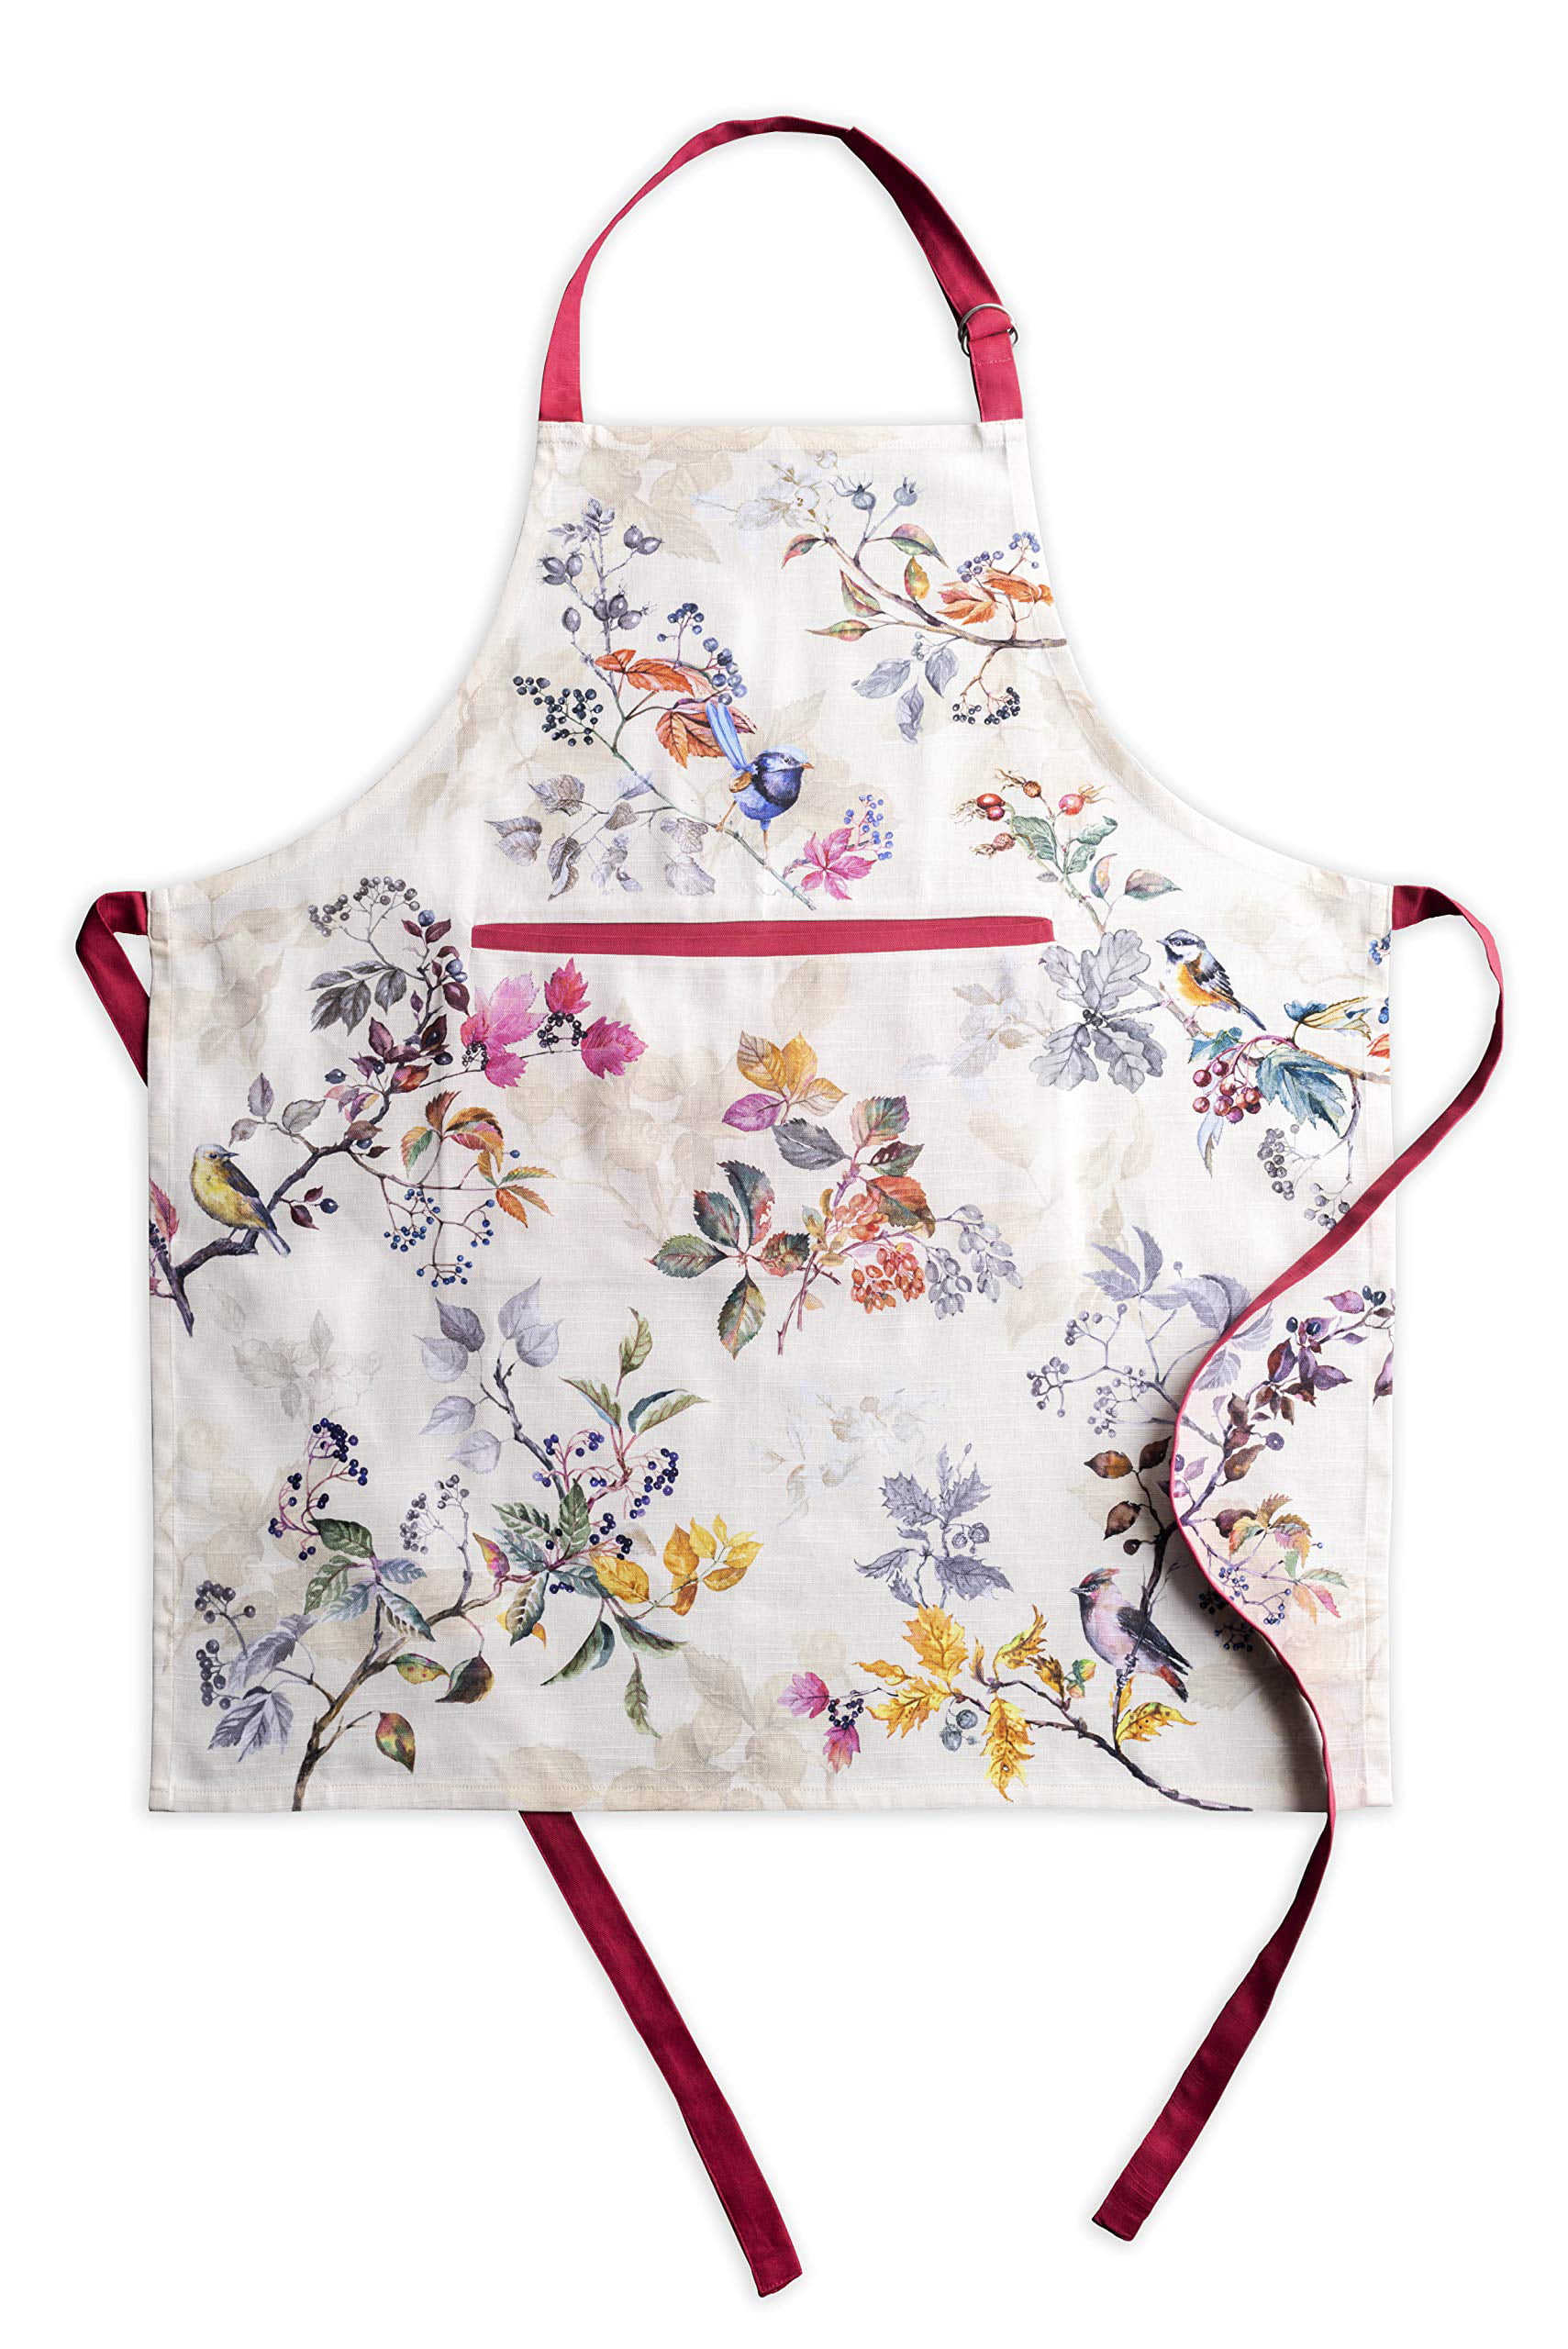 Maison d' Hermine 100% Cotton 1 Piece Kitchen Easter Apron with an Adjustable Neck with Long Ties for Women Men Spring/Summer